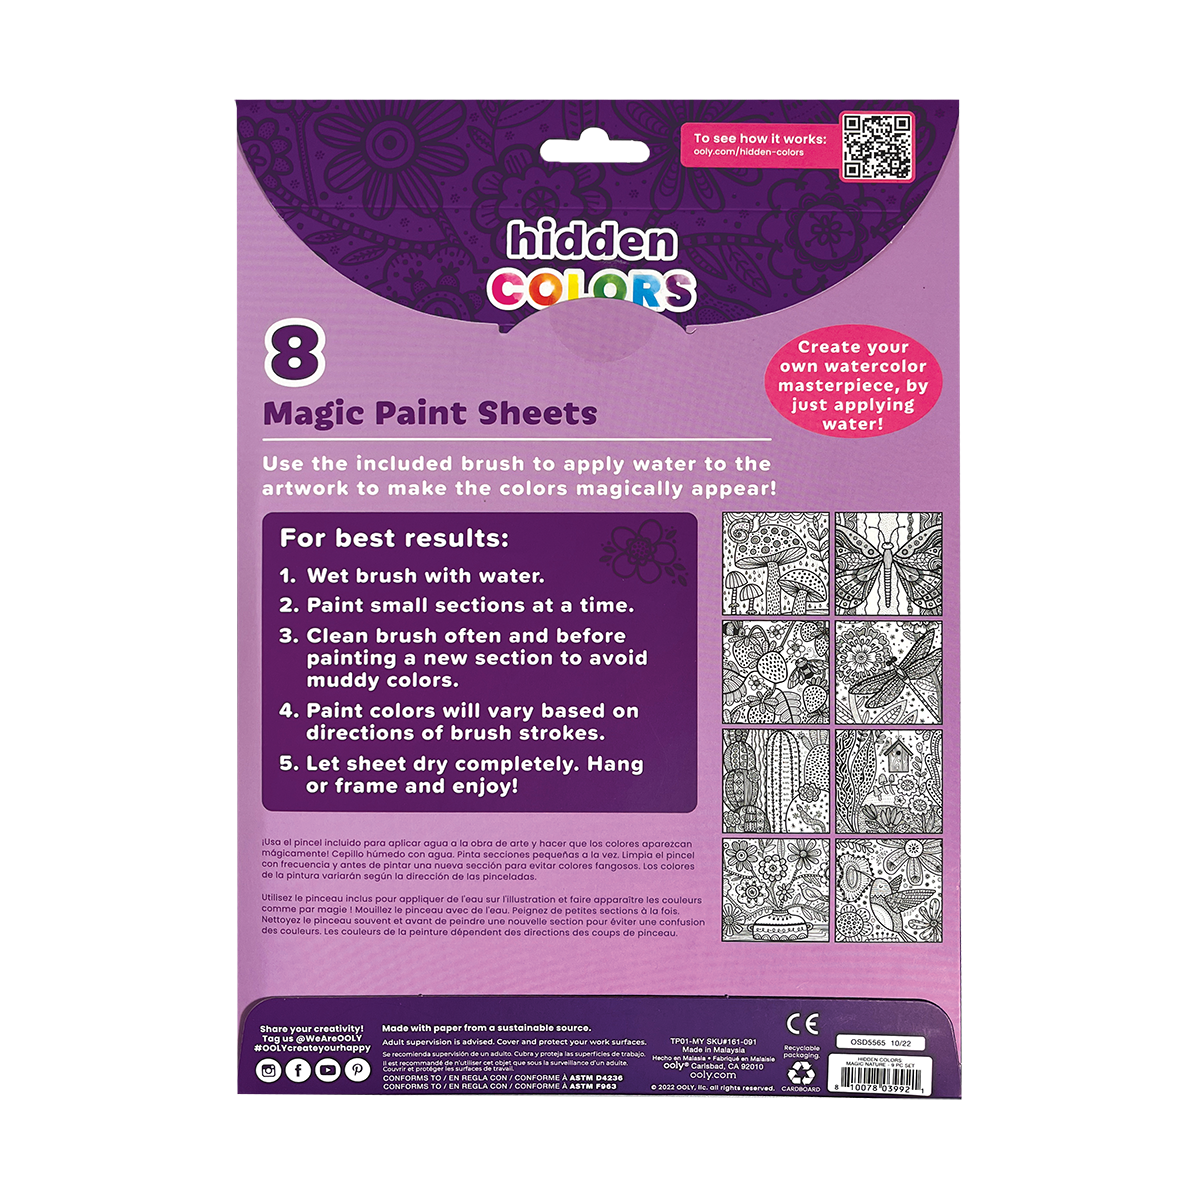 OOLY Hidden Colors Magic Paint Sheets - Magic Nature back side view of packaging